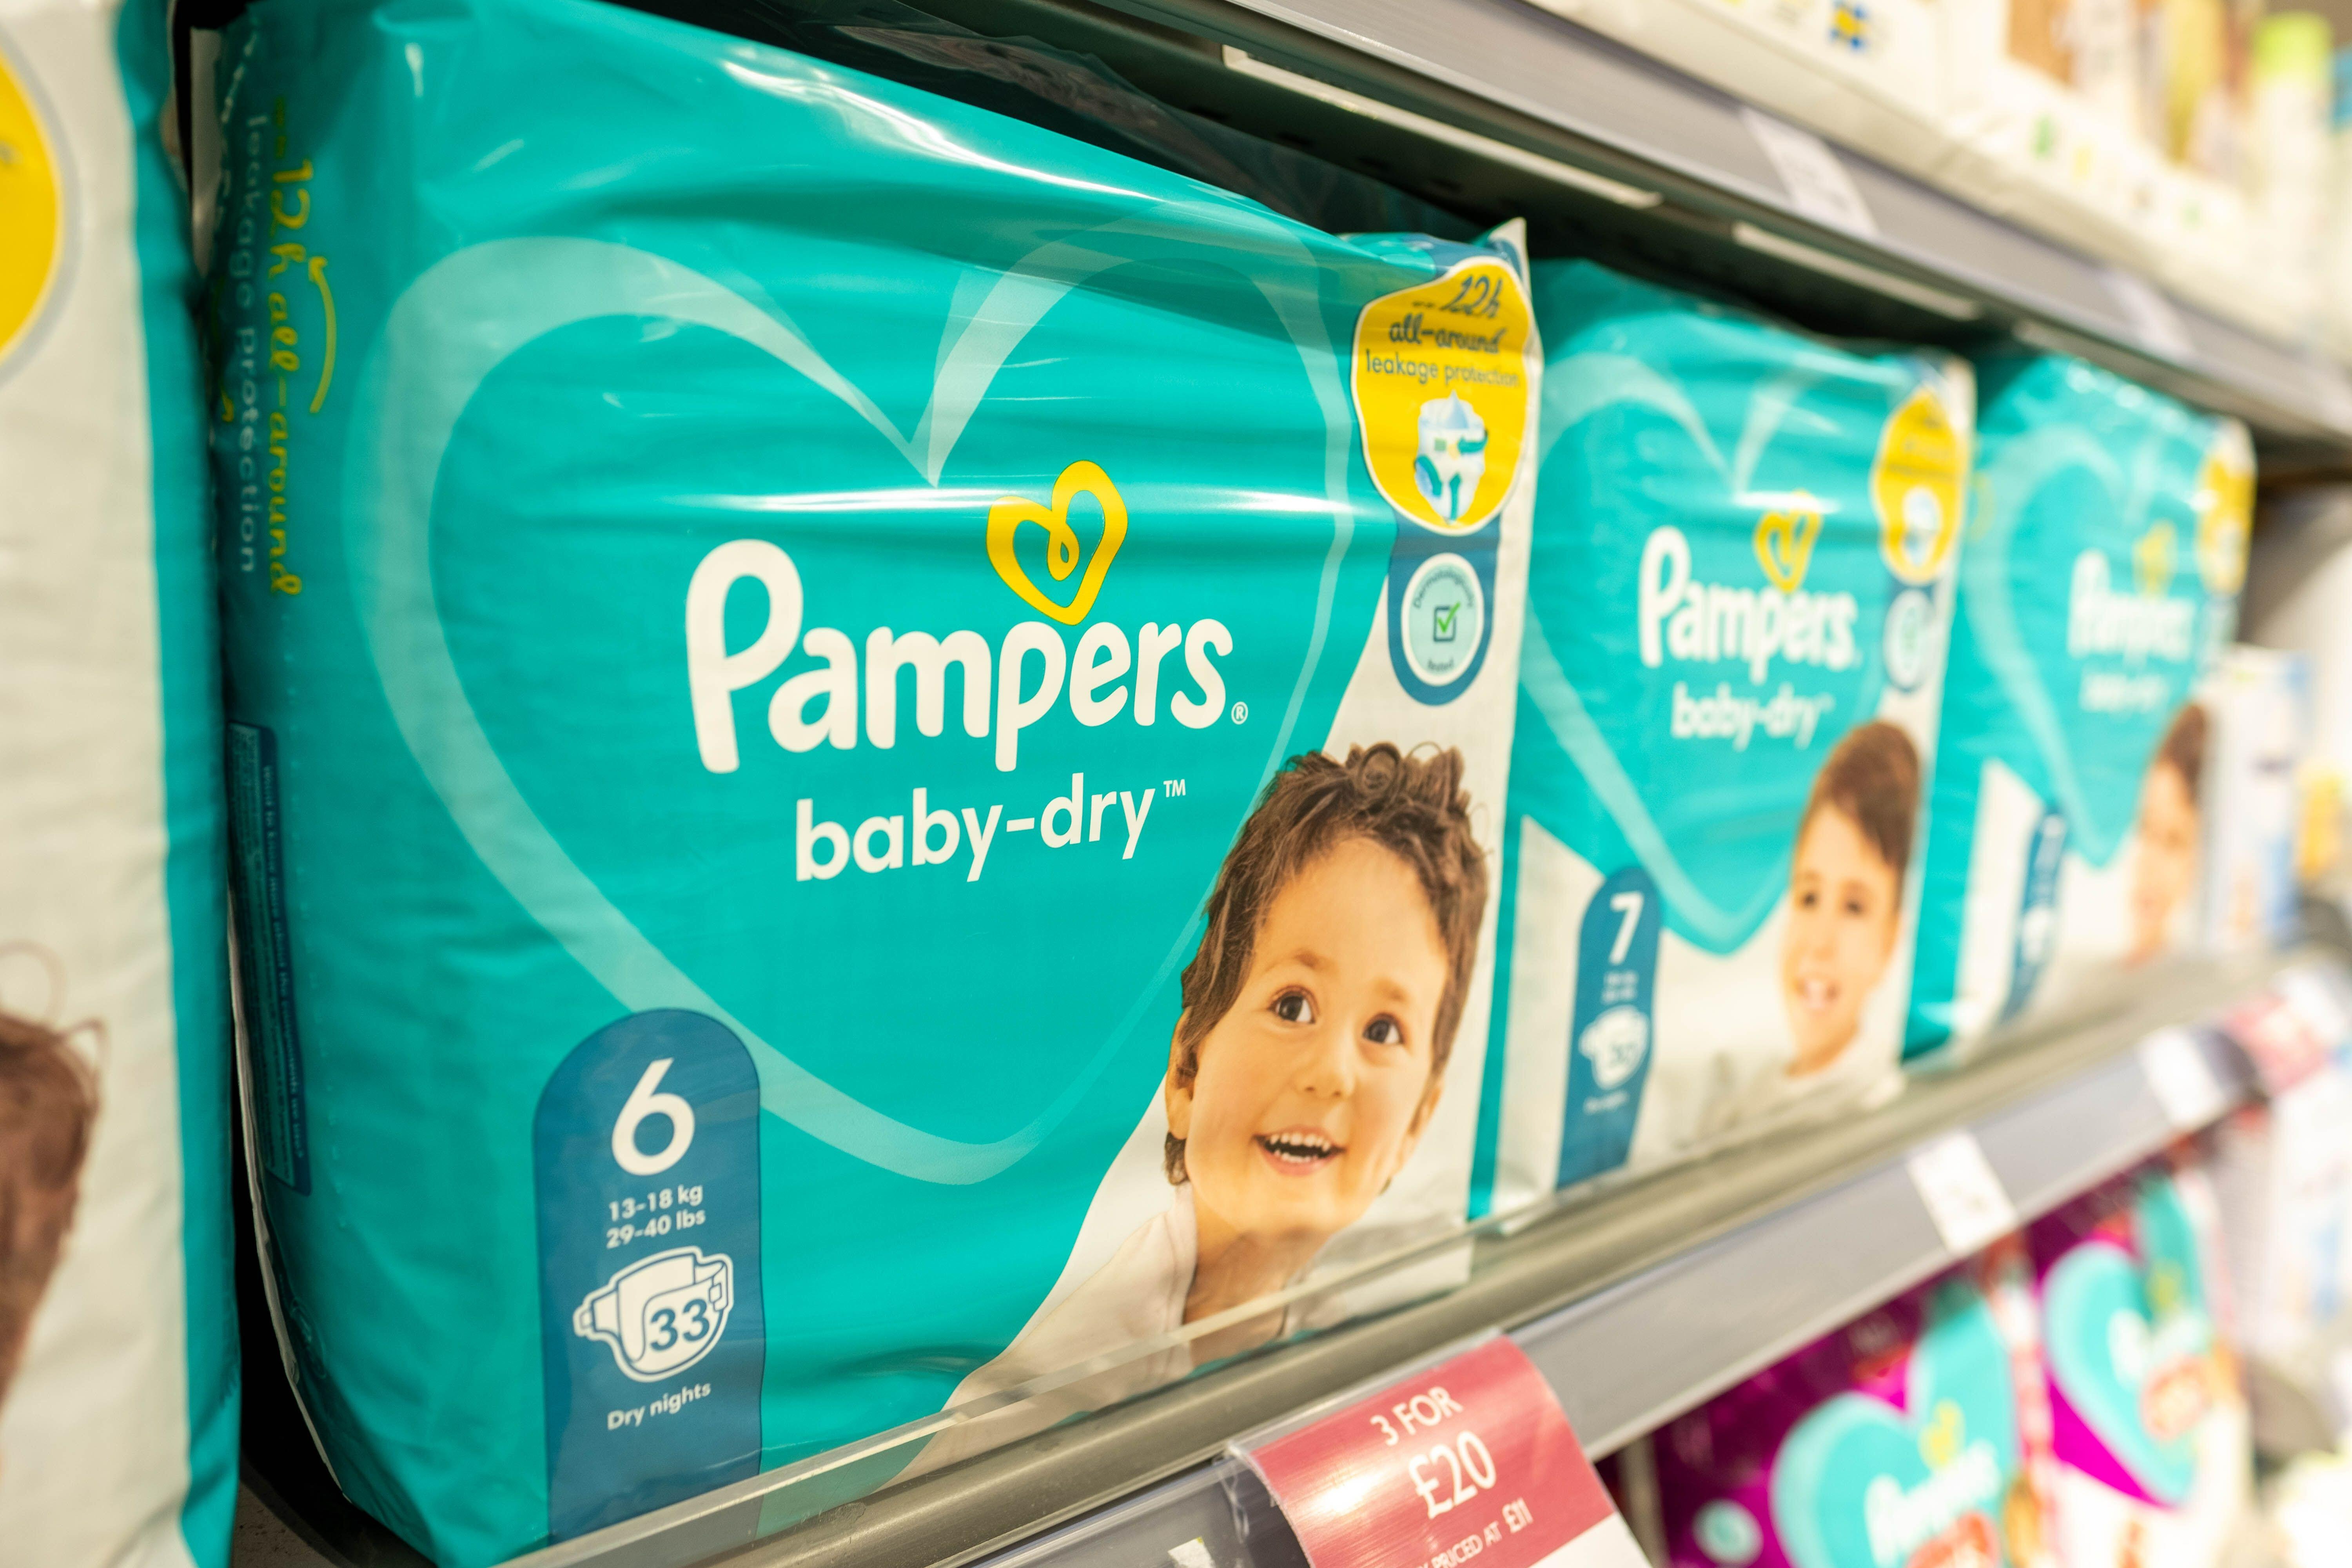 pampers co uk free pack